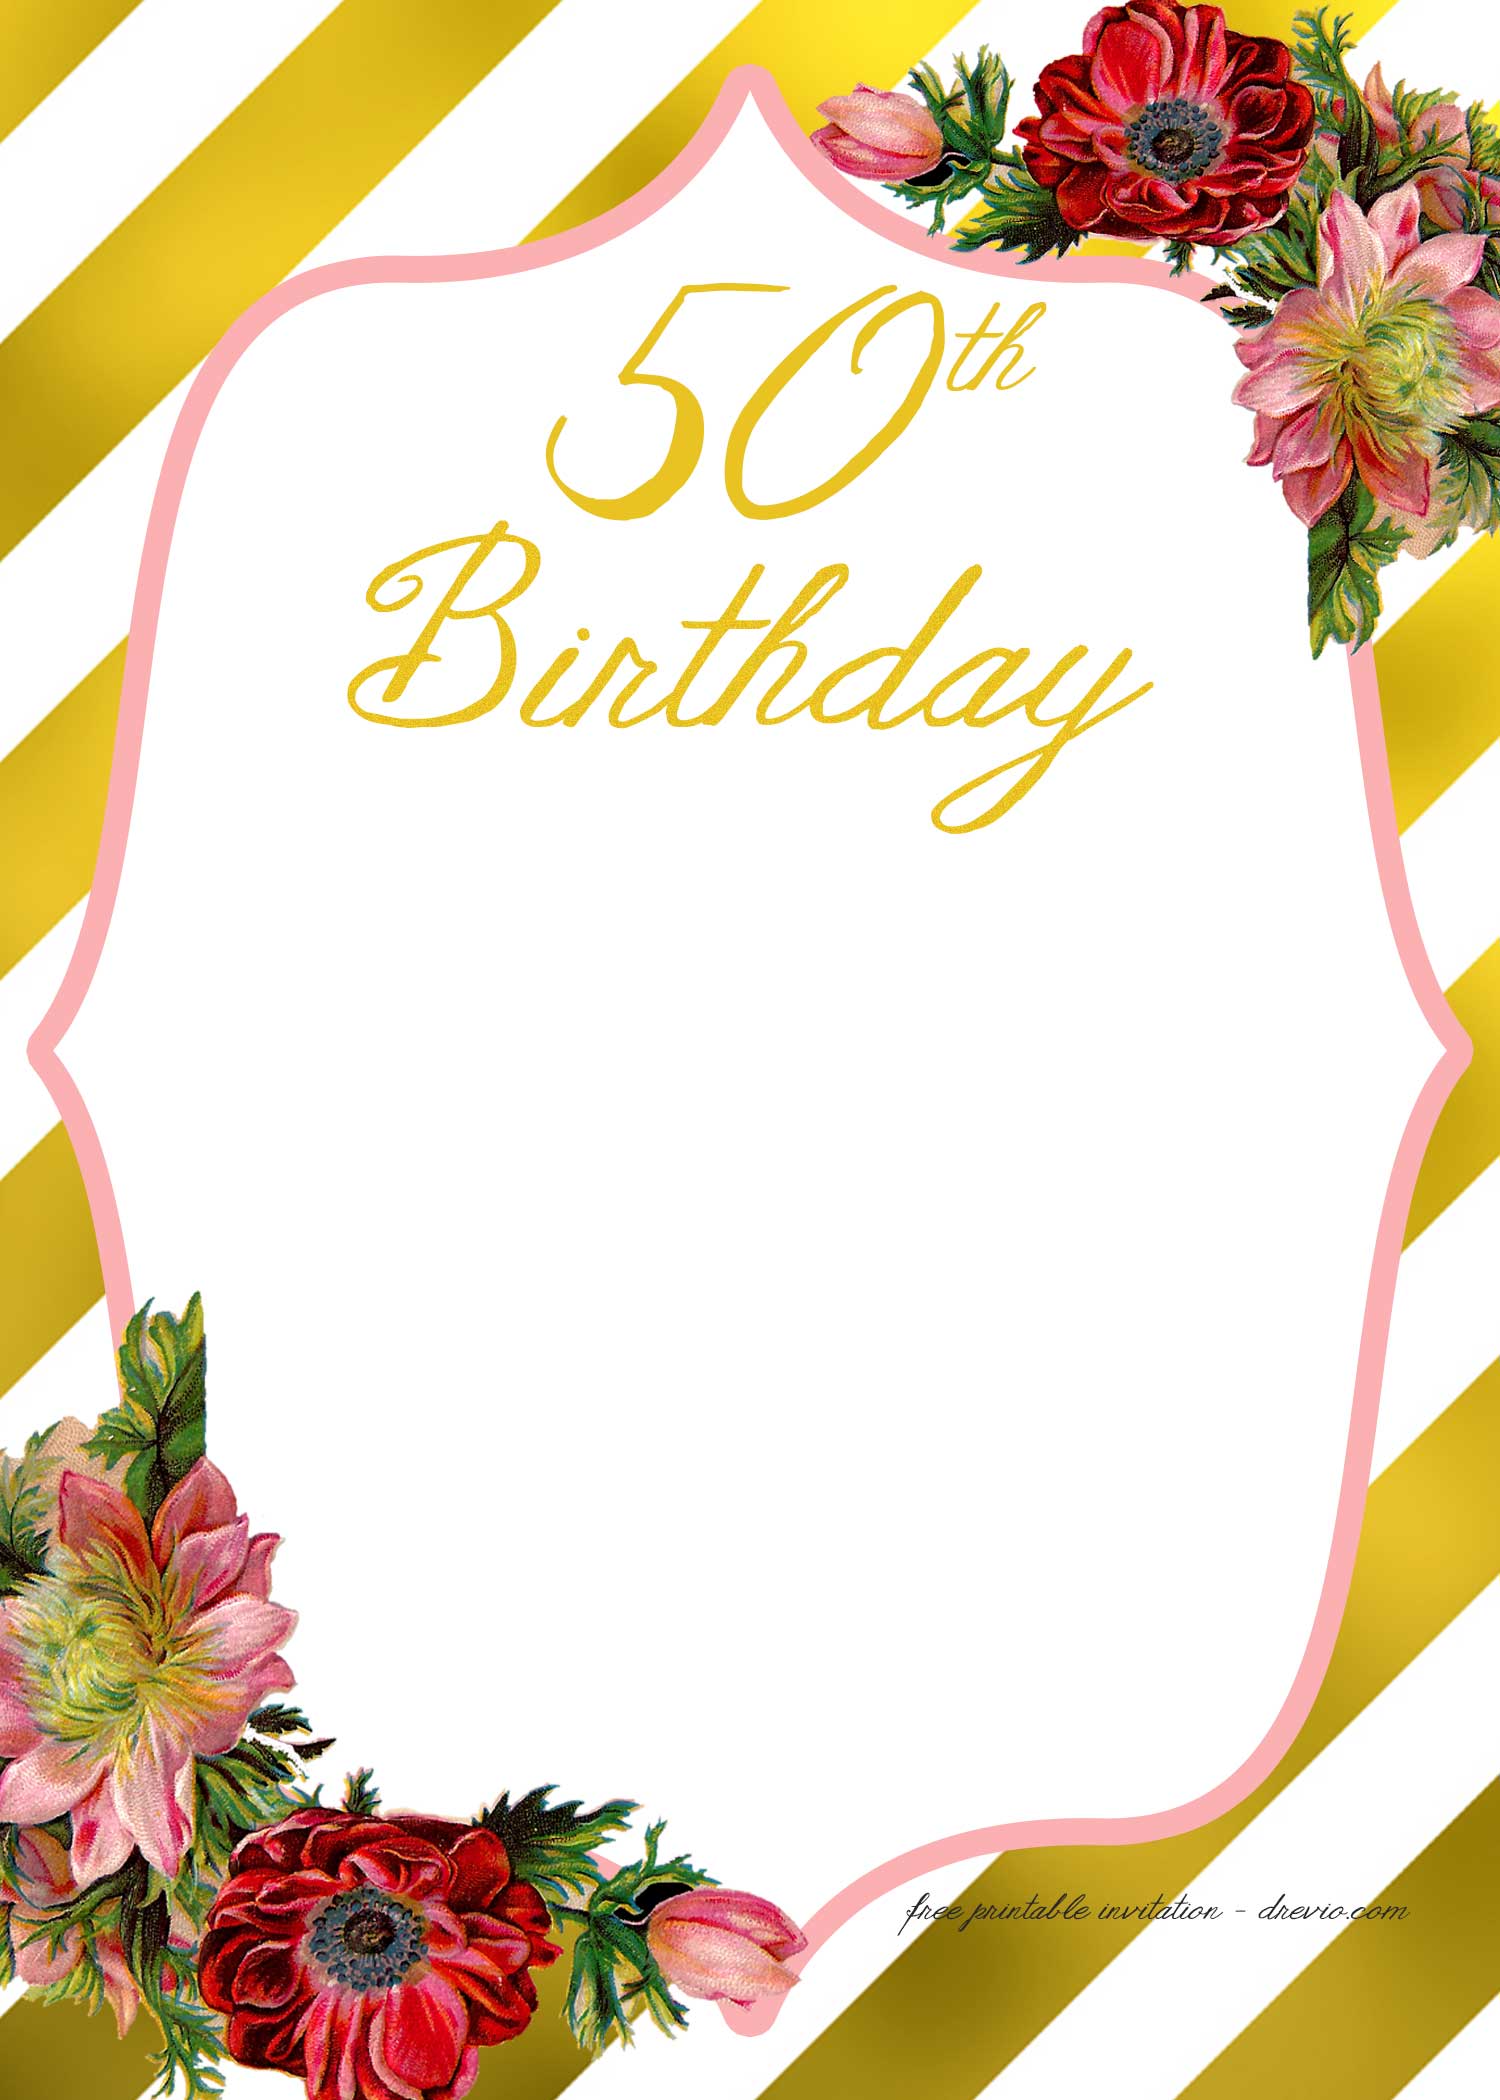 Birthday Template Free For Your Needs